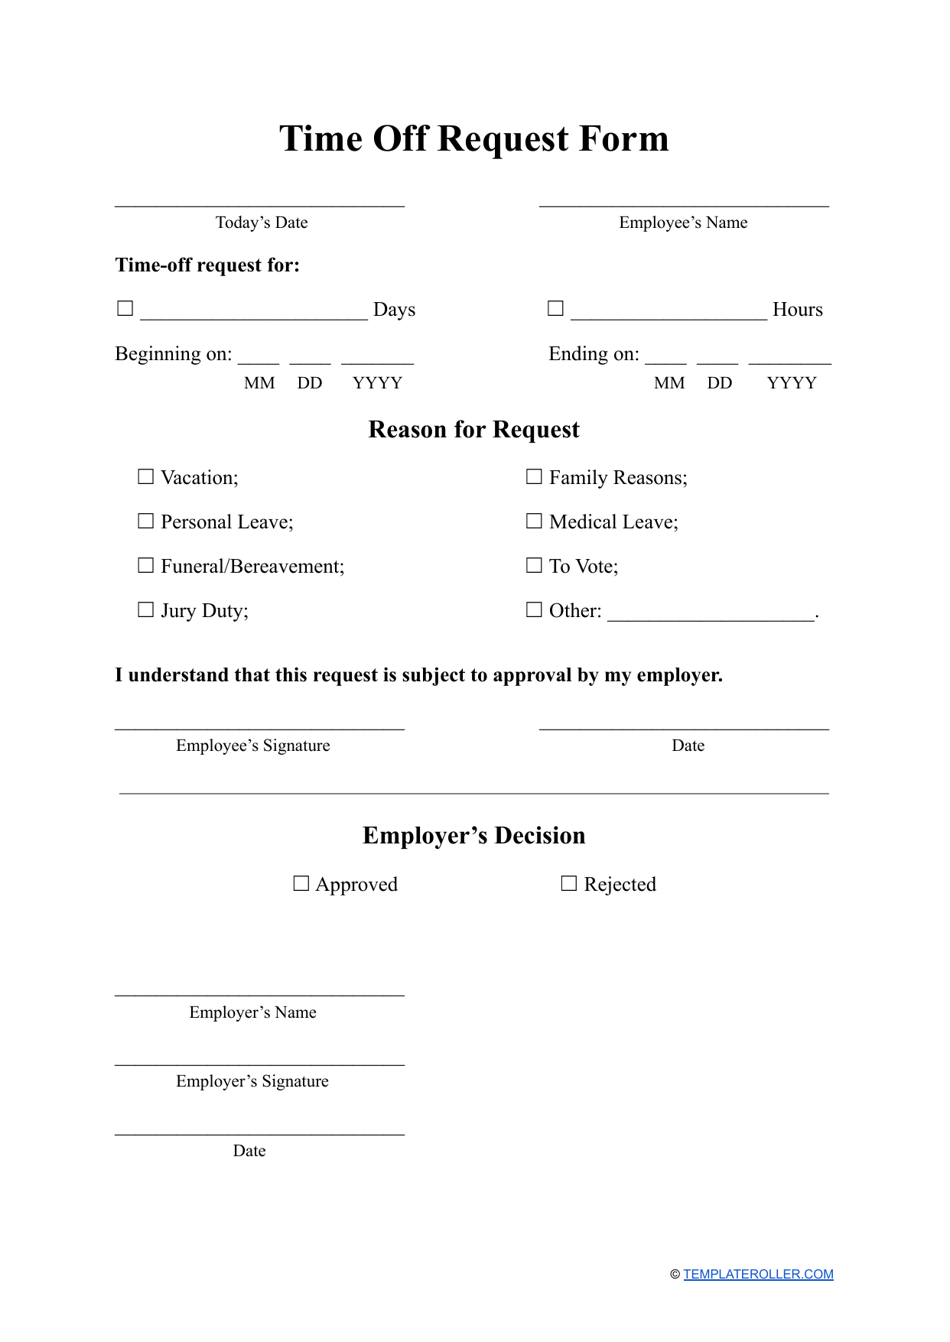 Time Off Request Form Template Printable